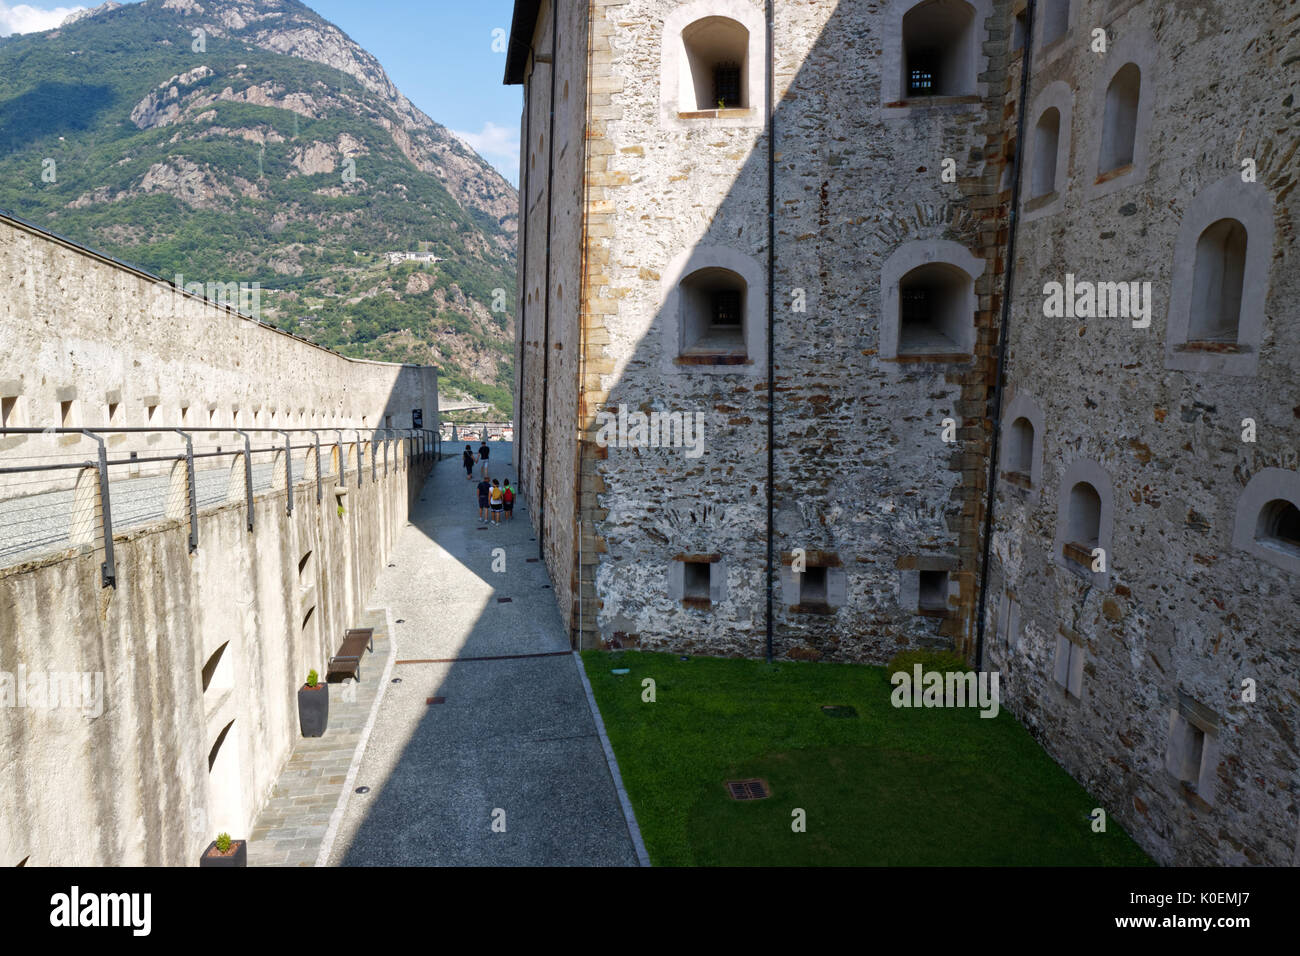 Fort Bard, Valle d'Aosta, Italy - August 18, 2017: Historic military construction defence Fort Bard. Touristic medieval fortress in Italian Alps. Loca Stock Photo